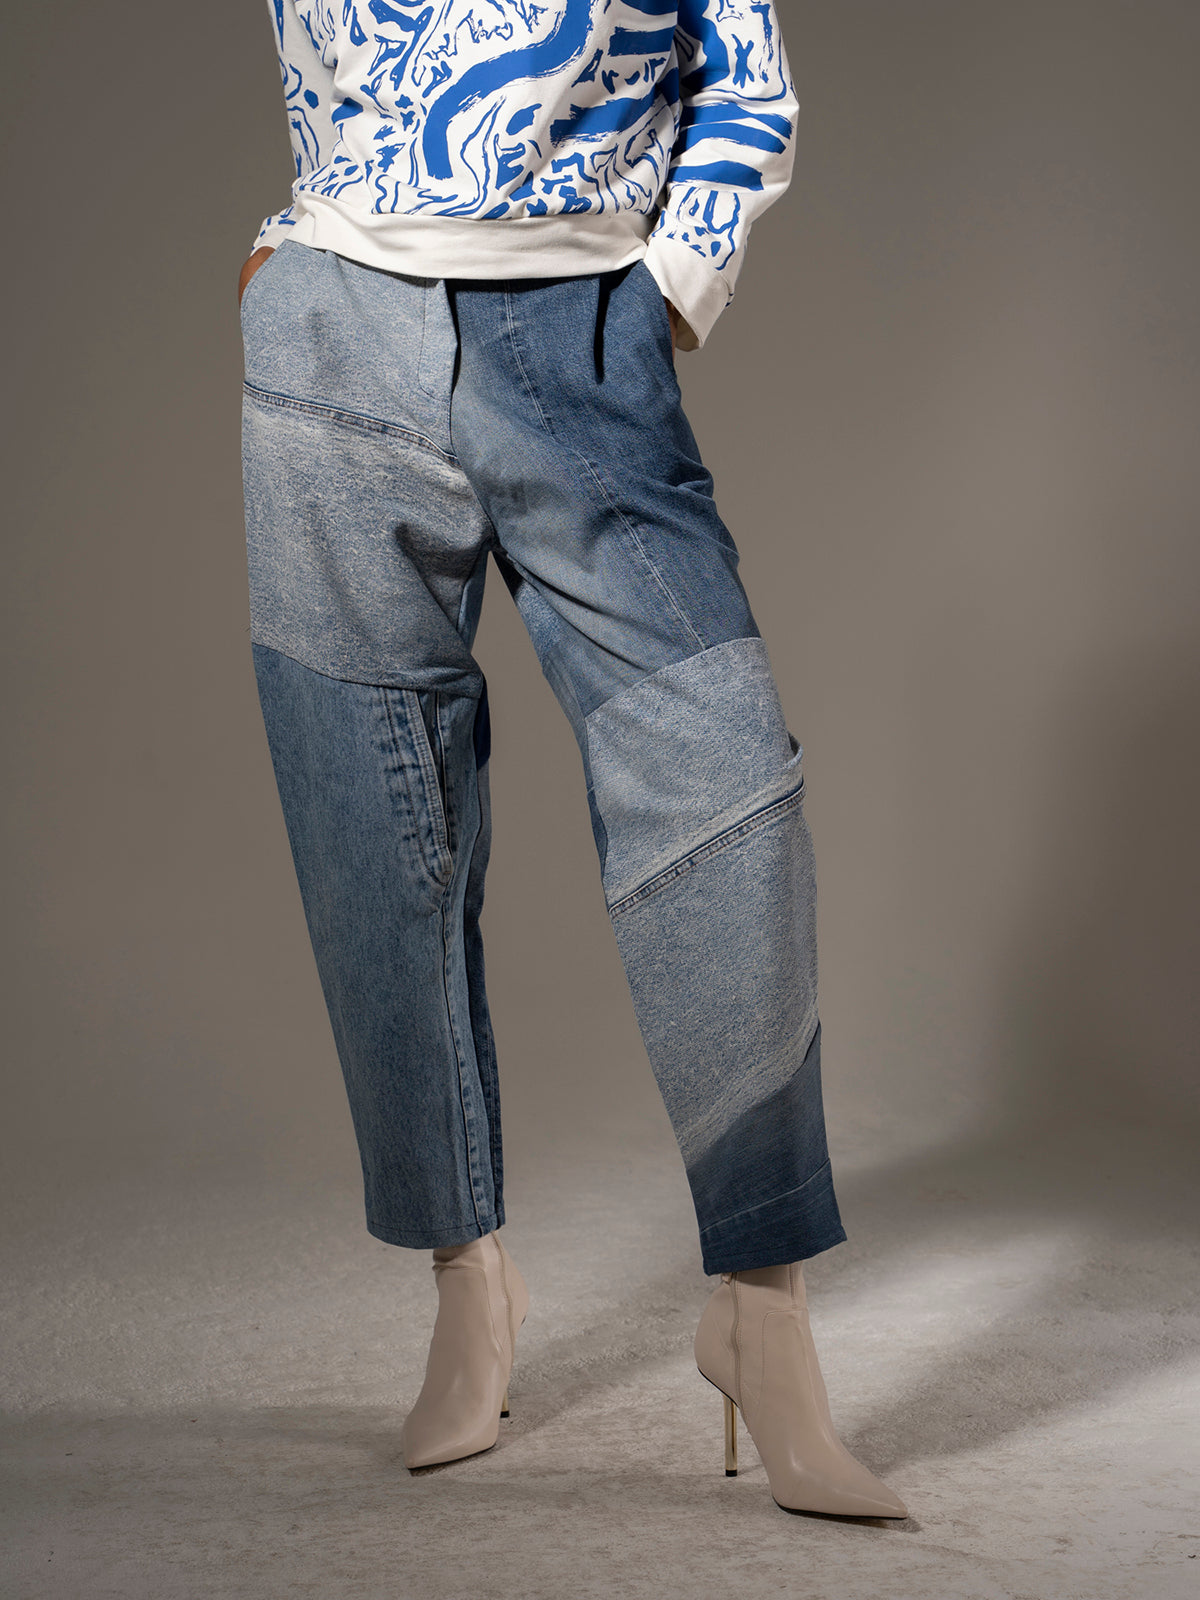 Jeans upcycling slouchy women's pants